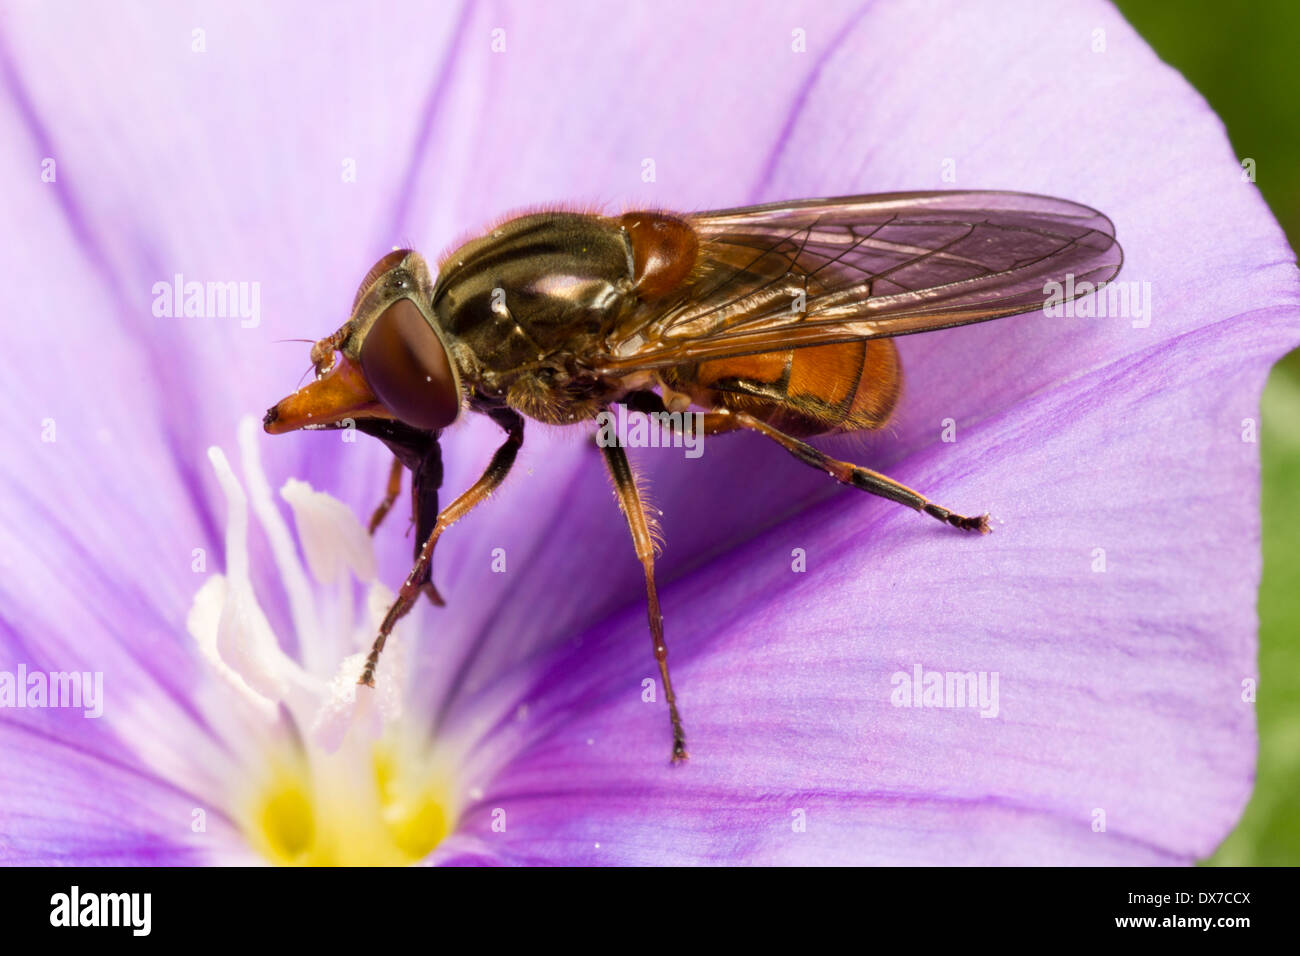 Long snouted UK hoverfly, Rhingia campestris, feeding on pollen on a flower of Convolvulus sabatius Stock Photo